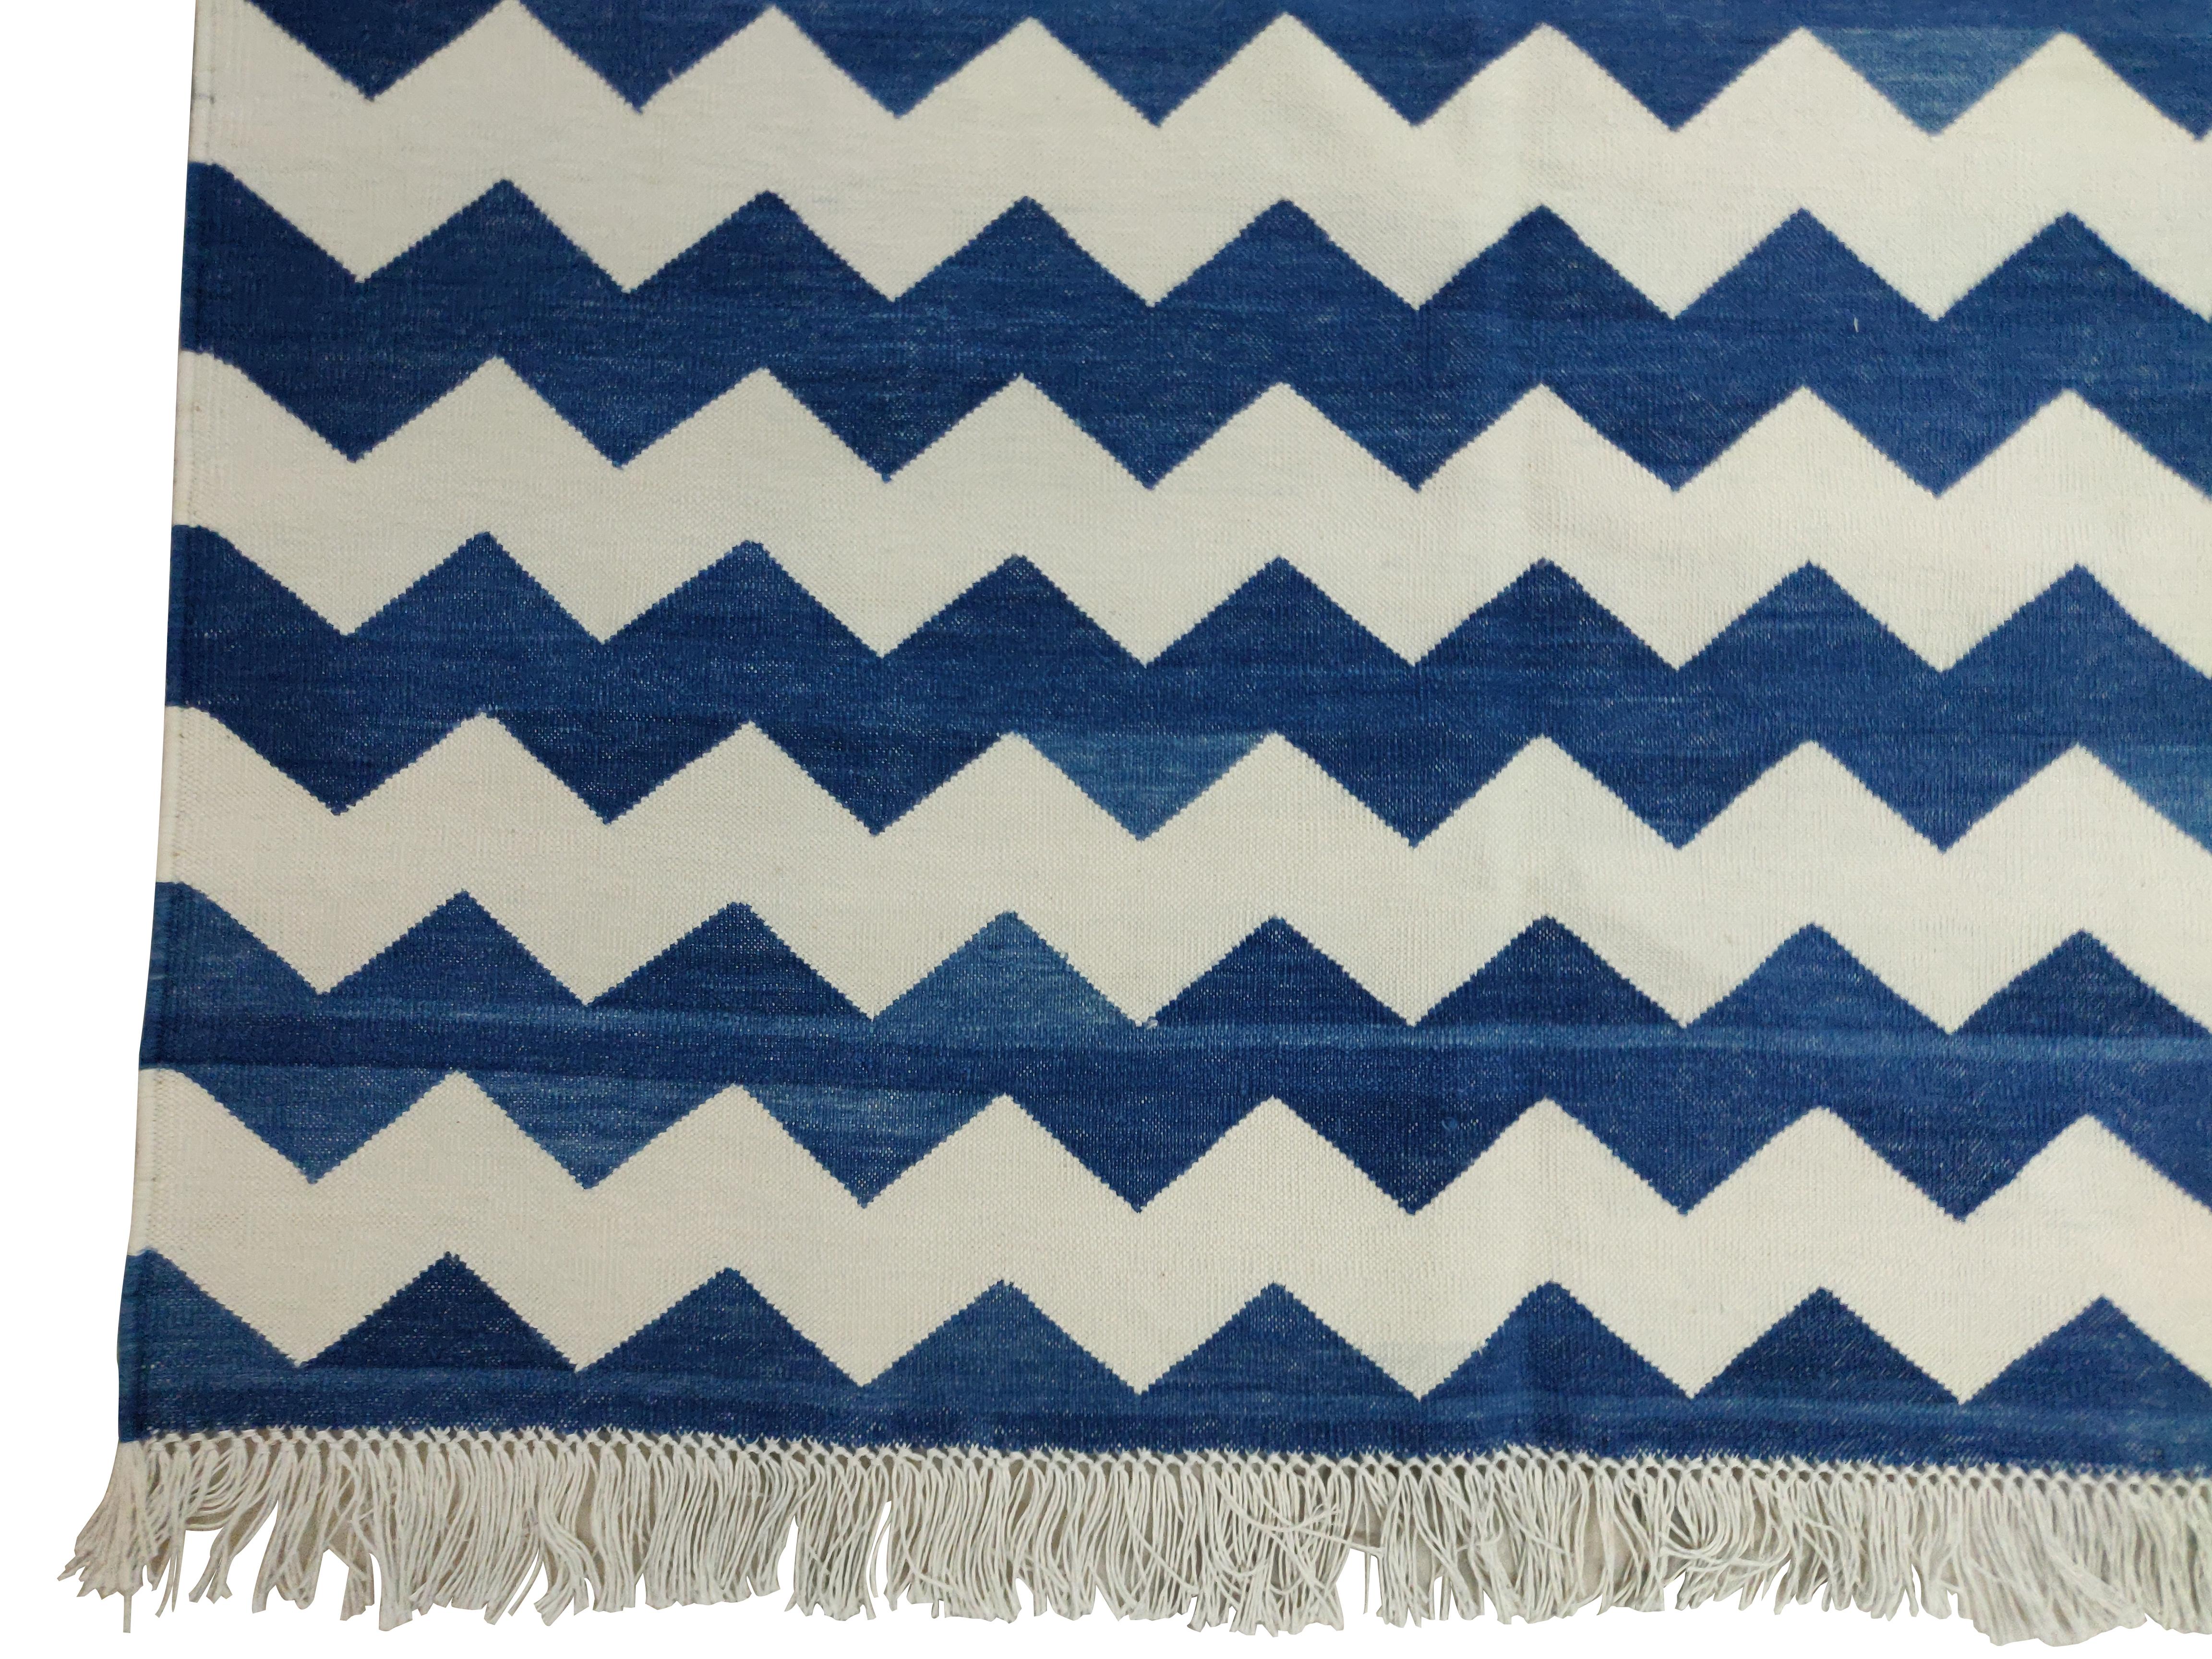 Hand-Woven Handmade Cotton Area Flat Weave Rug, 6x9 Blue And White Zig Zag Striped Dhurrie For Sale